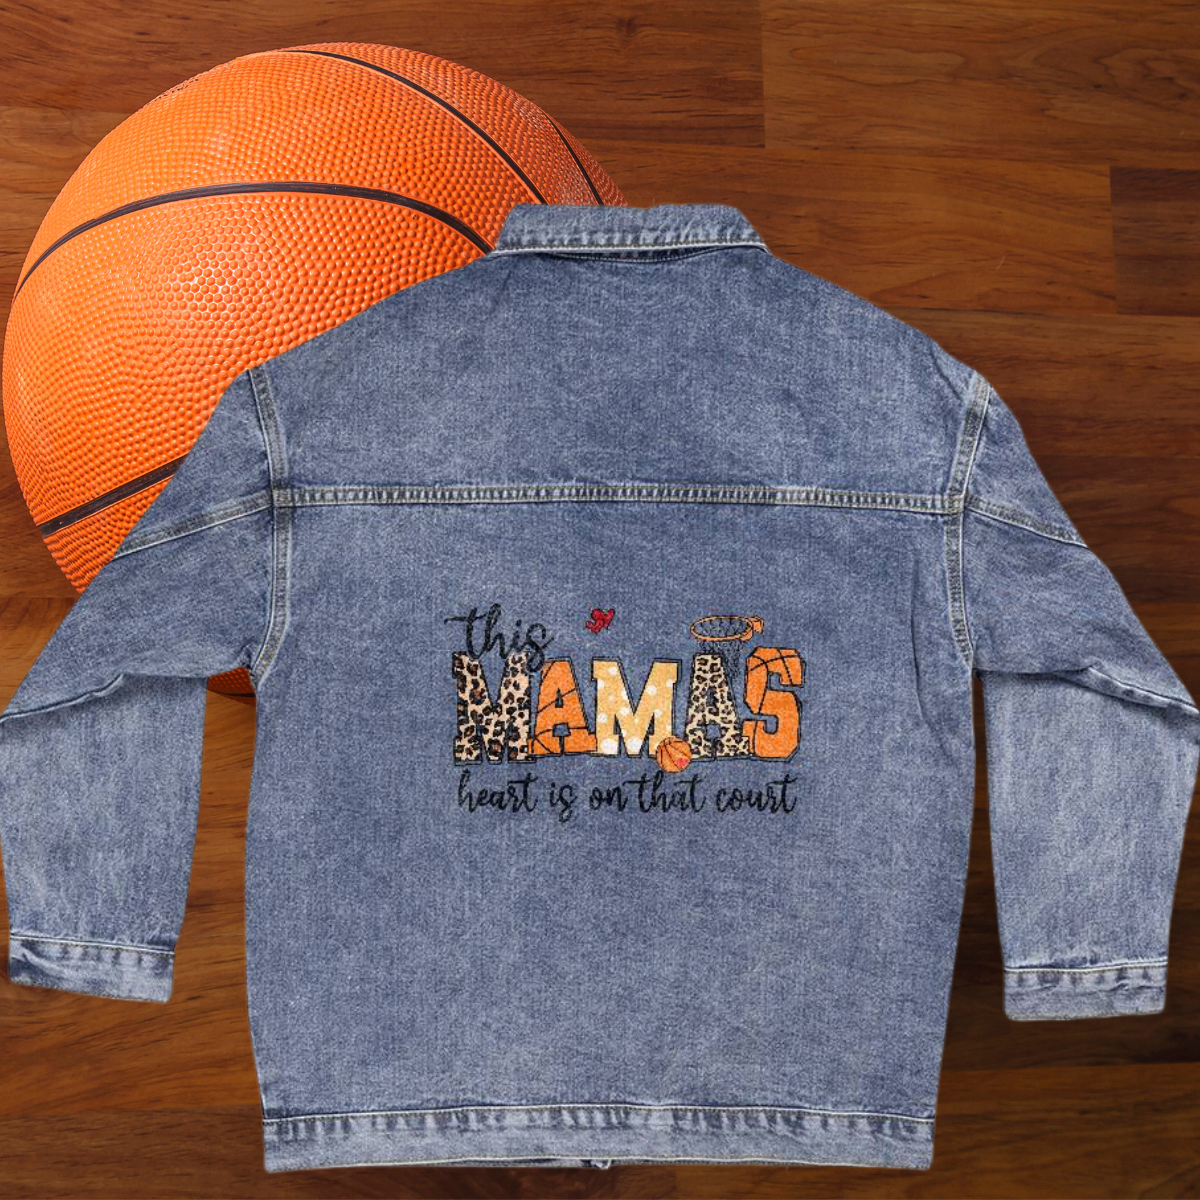 | Basketball Mama |This Mama's Heart Is on the Court | Oversized Women's Denim Jacket